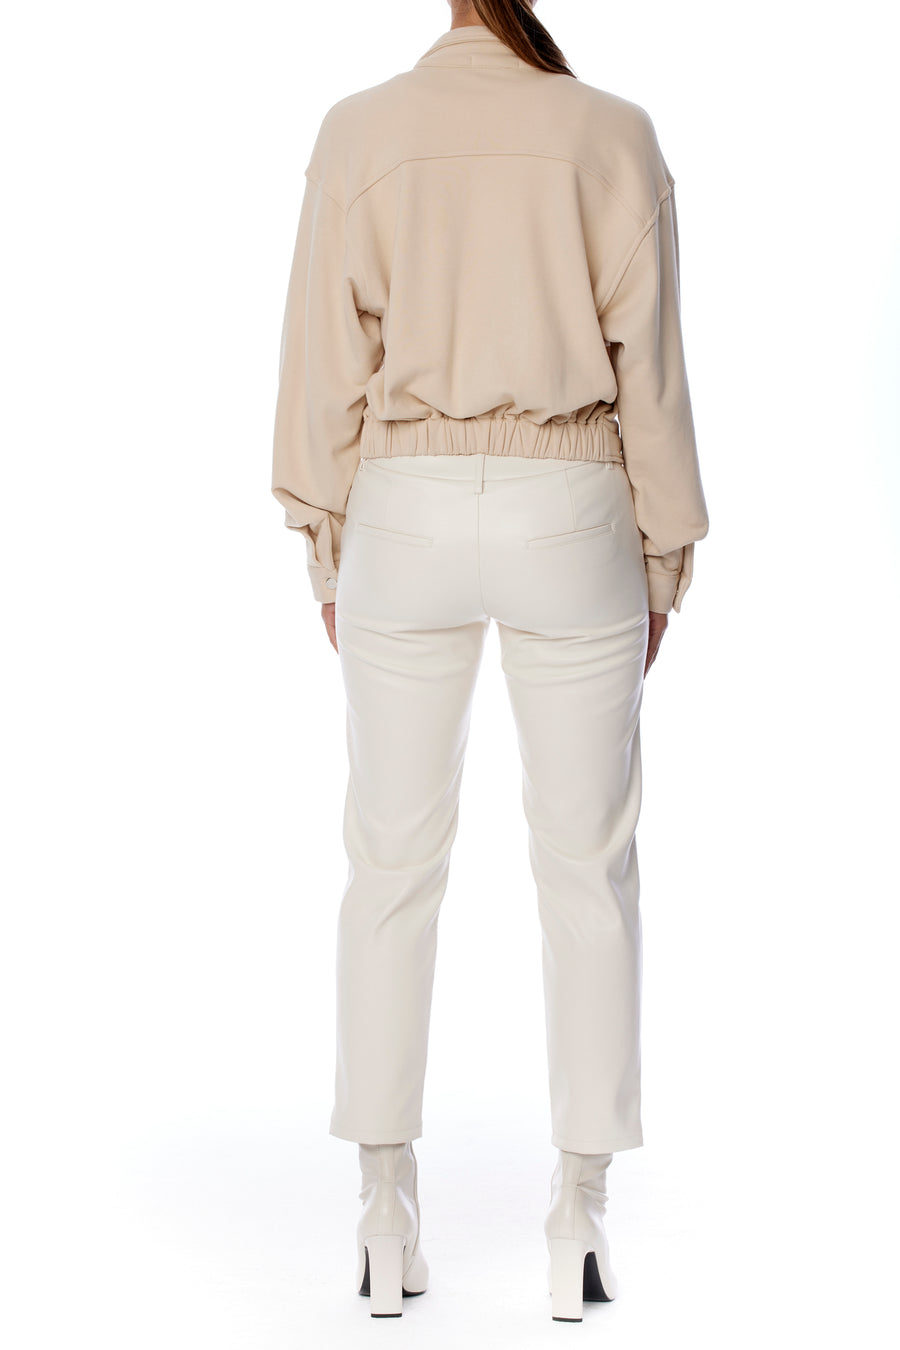 long sleeve, button up jacket with snap front closure, mock neck and side pockets in sand